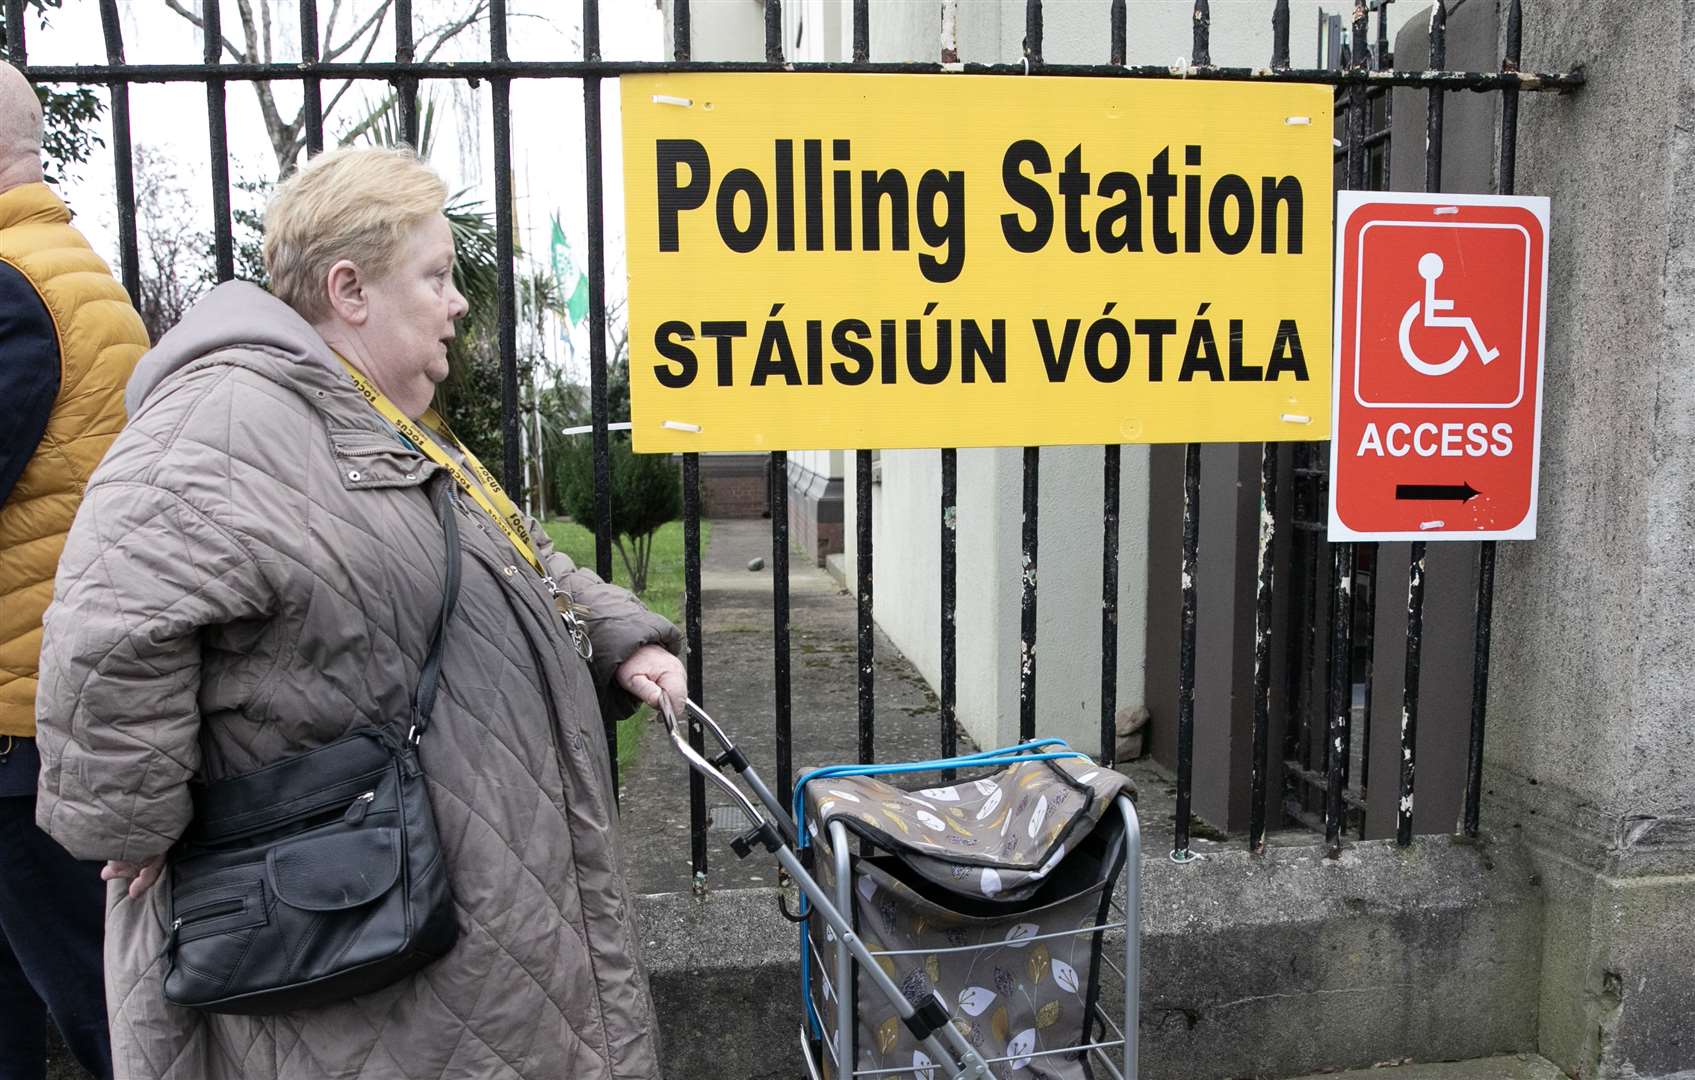 Members of the public arrive at the polling station in scoil Treasa Naofa on Donore Avenue, Dublin, on Friday (Gareth Chaney/PA)